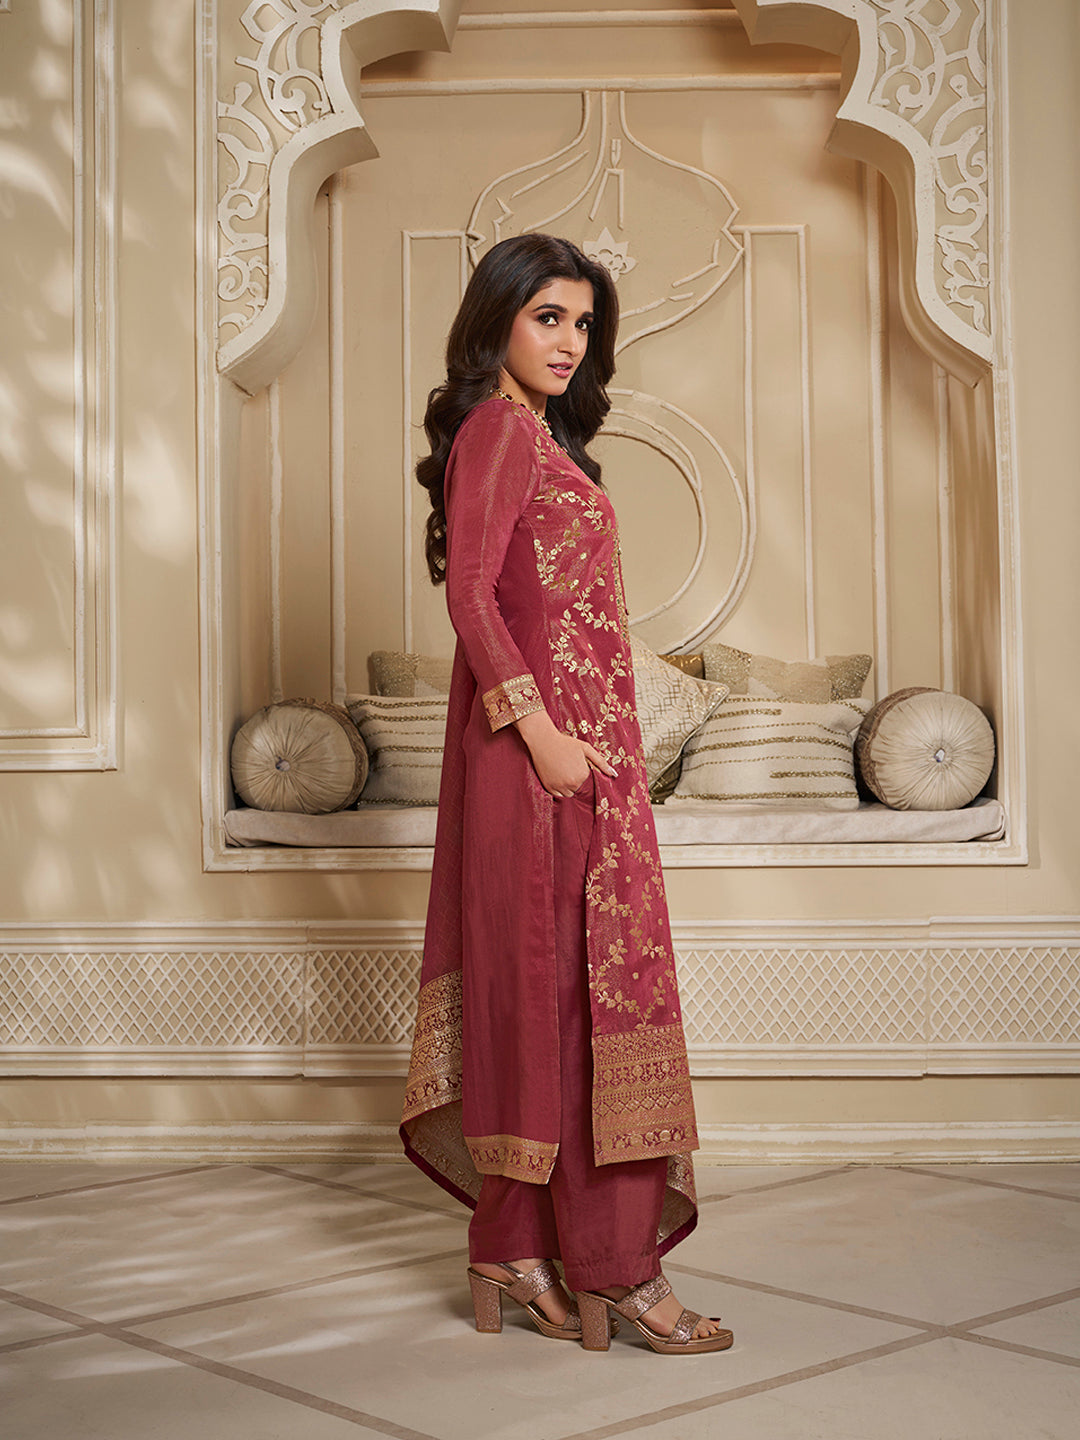 Red Tissue Jacquard Kurta Suit Set with Jaal Pattern & Hand made Buttons Product vendor